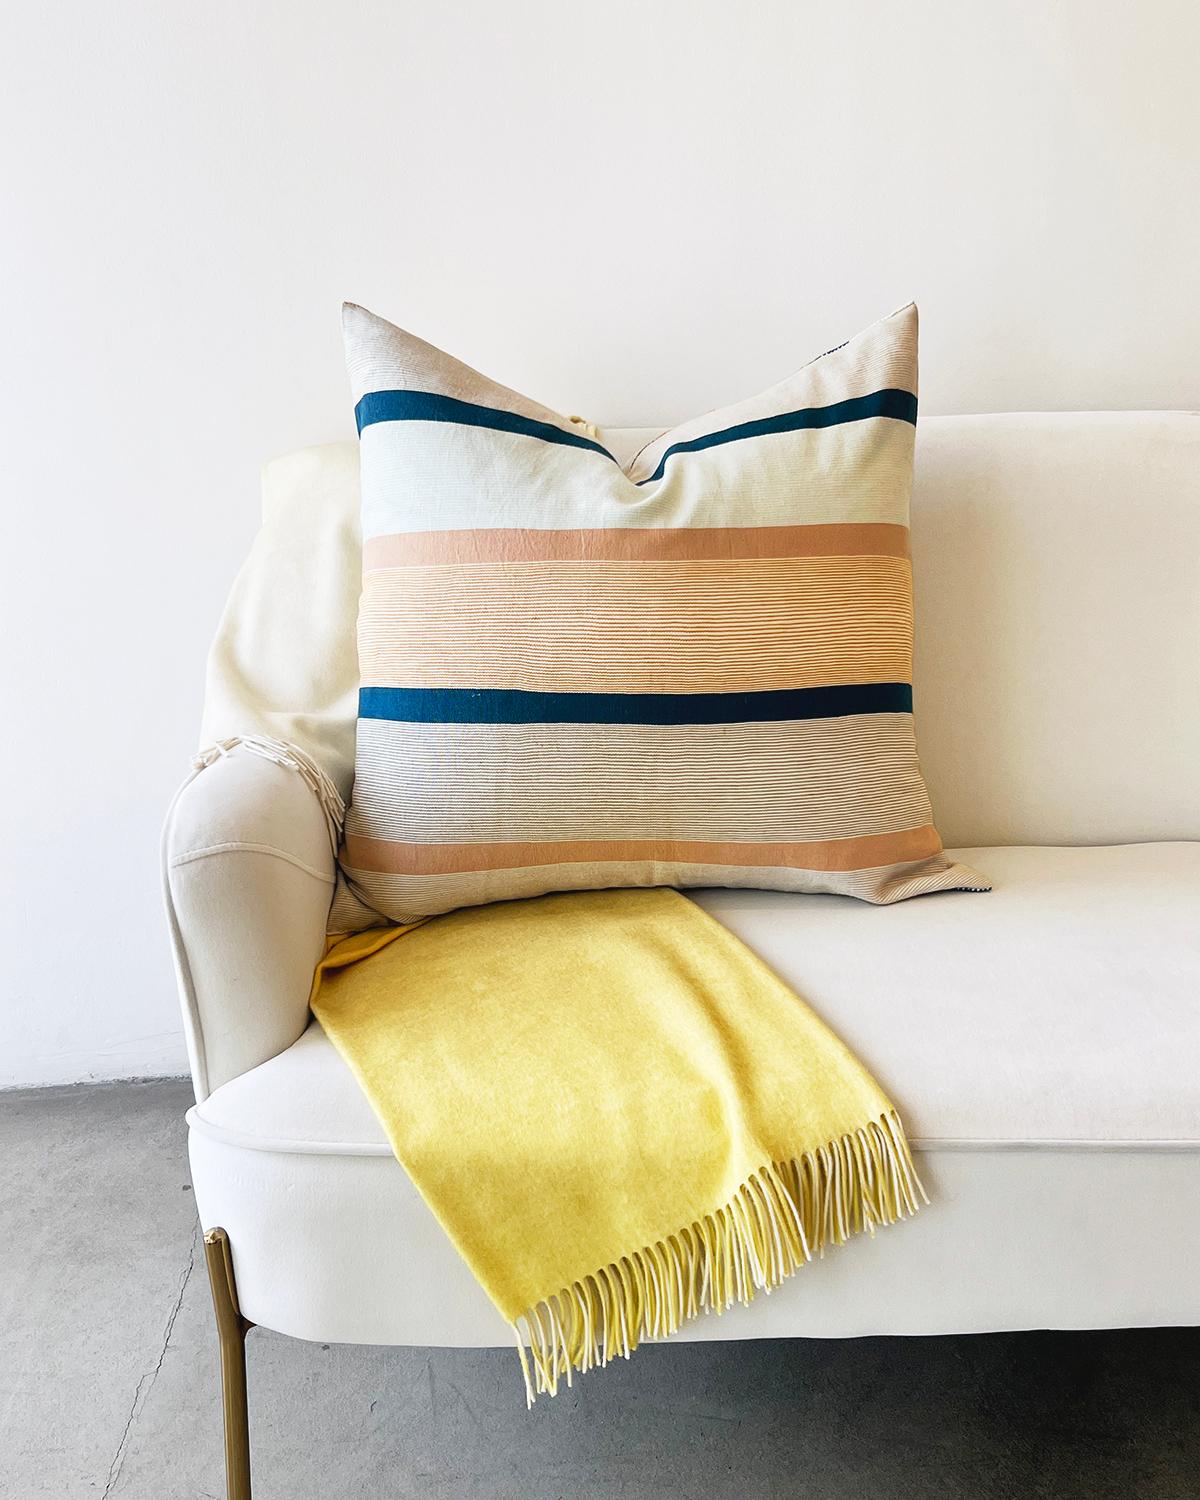 Experience the vibrant colors and bold stripes of the Ocaso Pillow. These handcrafted, fair-trade, high-end throw pillows are the perfect accent to Mexican and Latin American home décor. Designed with local materials, each cushion will add a burst